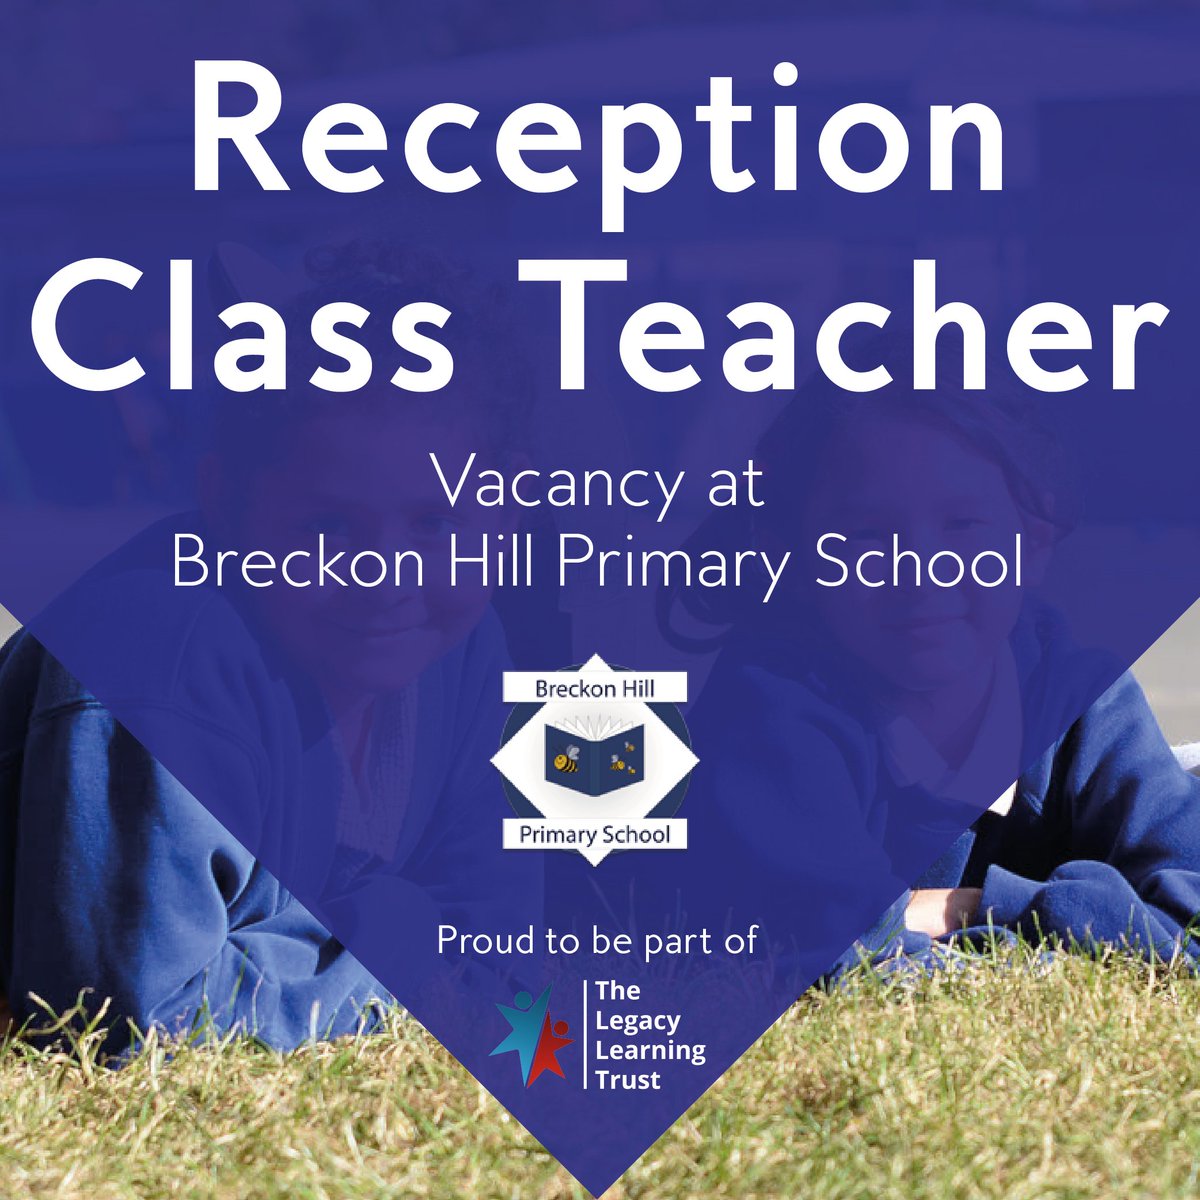 Reception Class Teacher vacancy at Breckon Hill Primary School Breckon Hill Primary School are seeking to appoint a highly motivated practitioner to who has a track record of excellent teaching and a deep understanding of how children learn. ➡️ thelegacylearningtrust.org.uk/current-career…